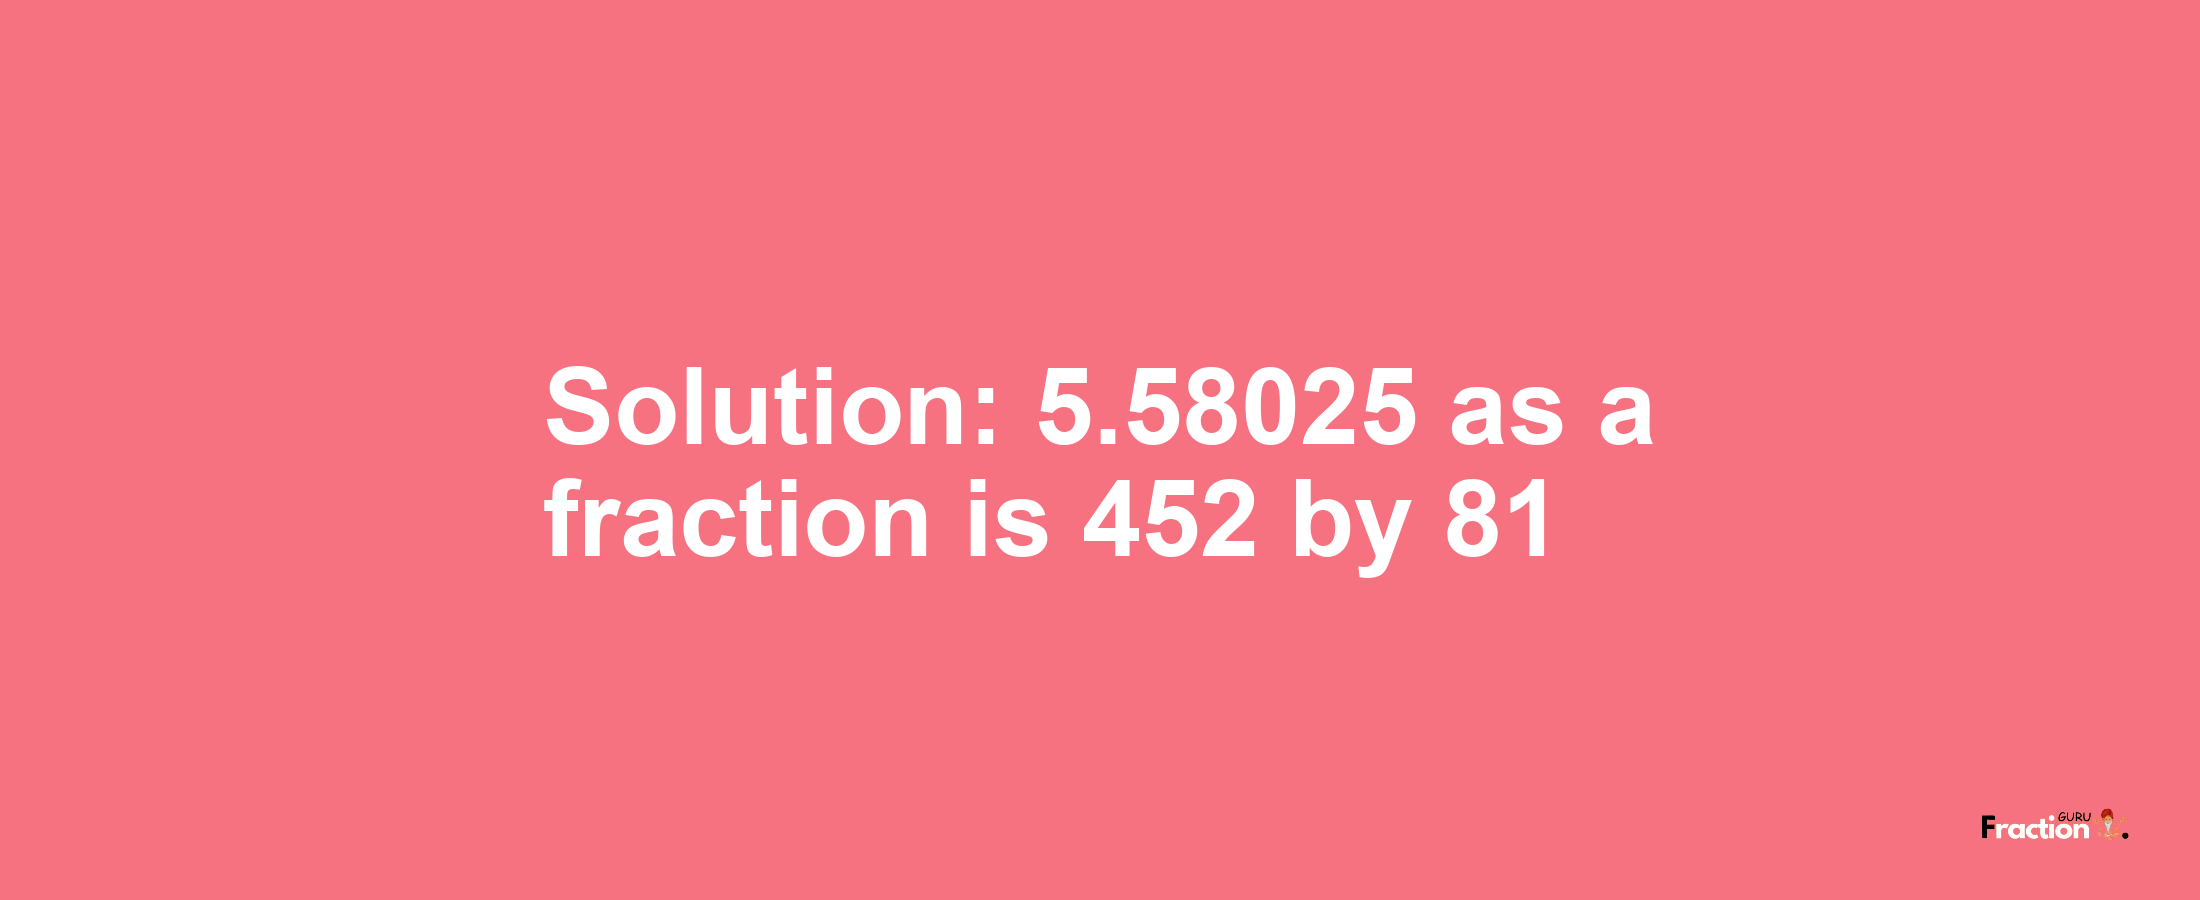 Solution:5.58025 as a fraction is 452/81